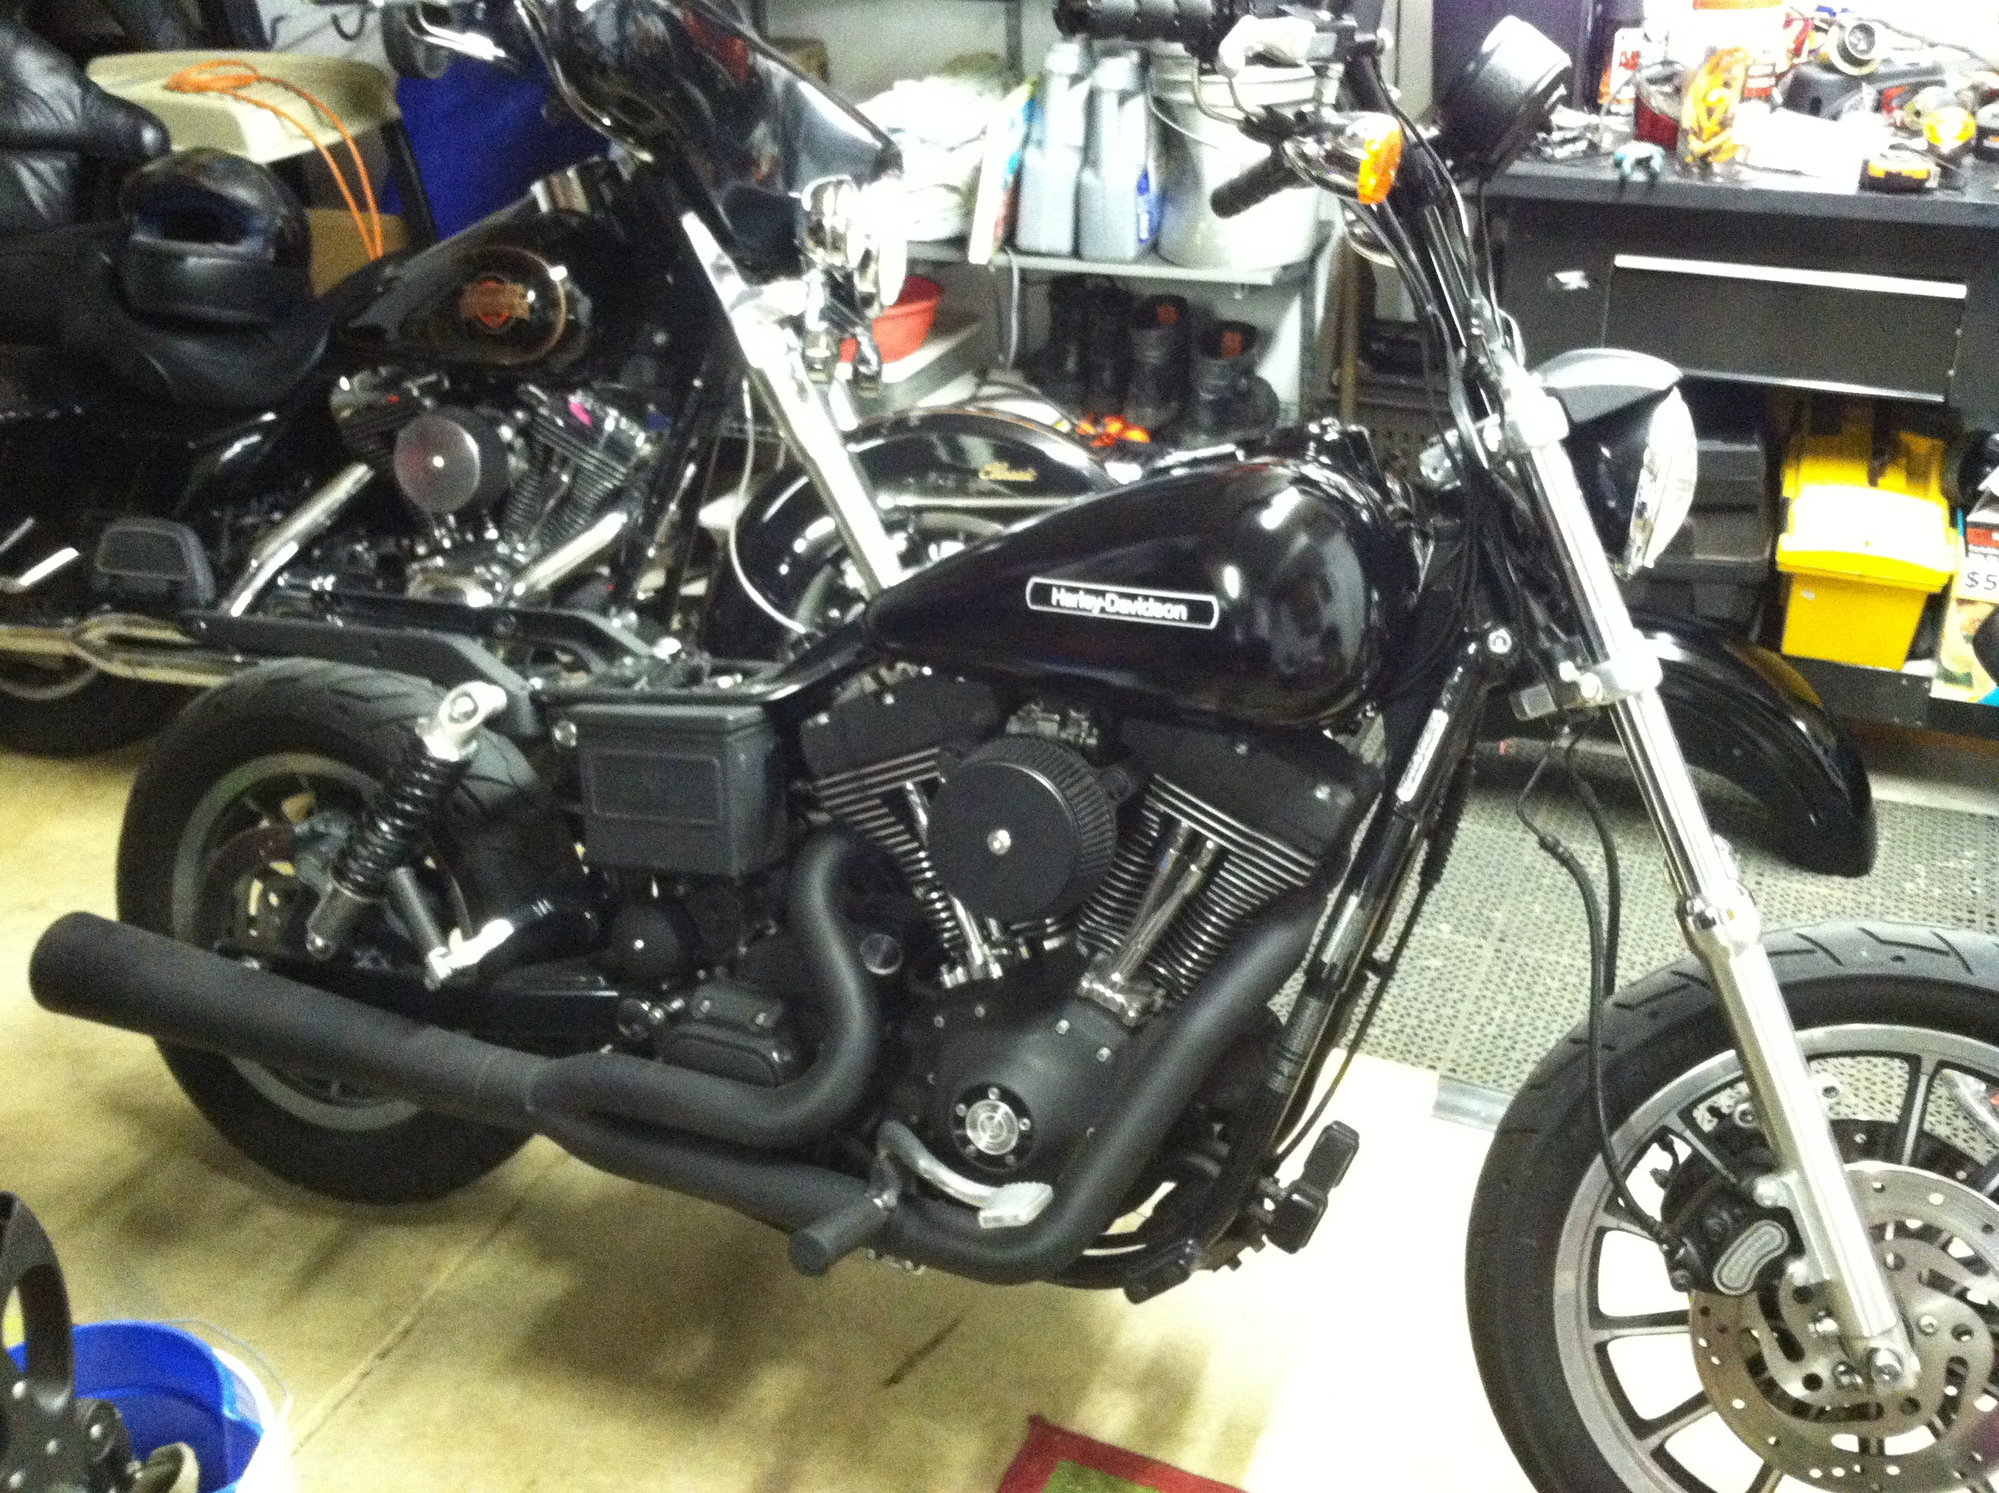 Post your Dynas with T-bars!! - Page 10 - Harley Davidson Forums